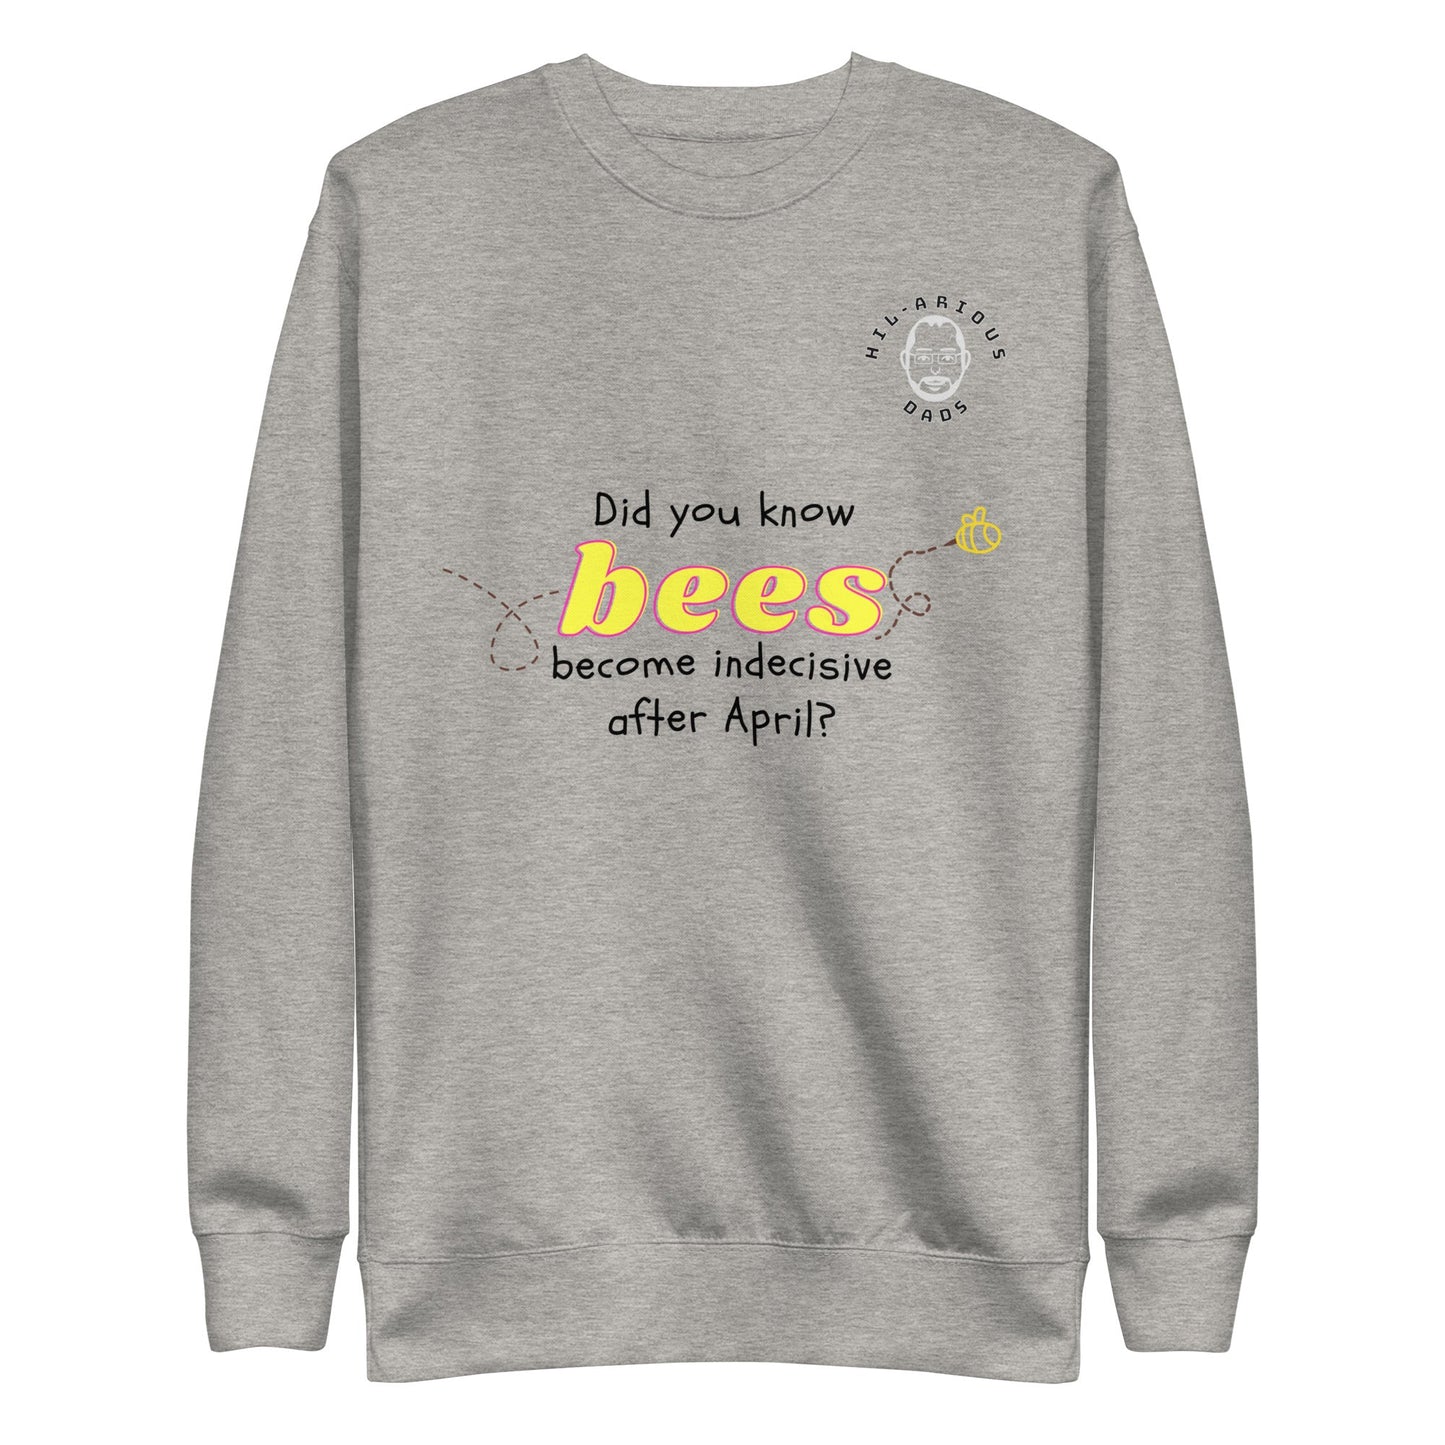 Did you know bees become indecisive after April?-Sweatshirt - Hil-arious Dads